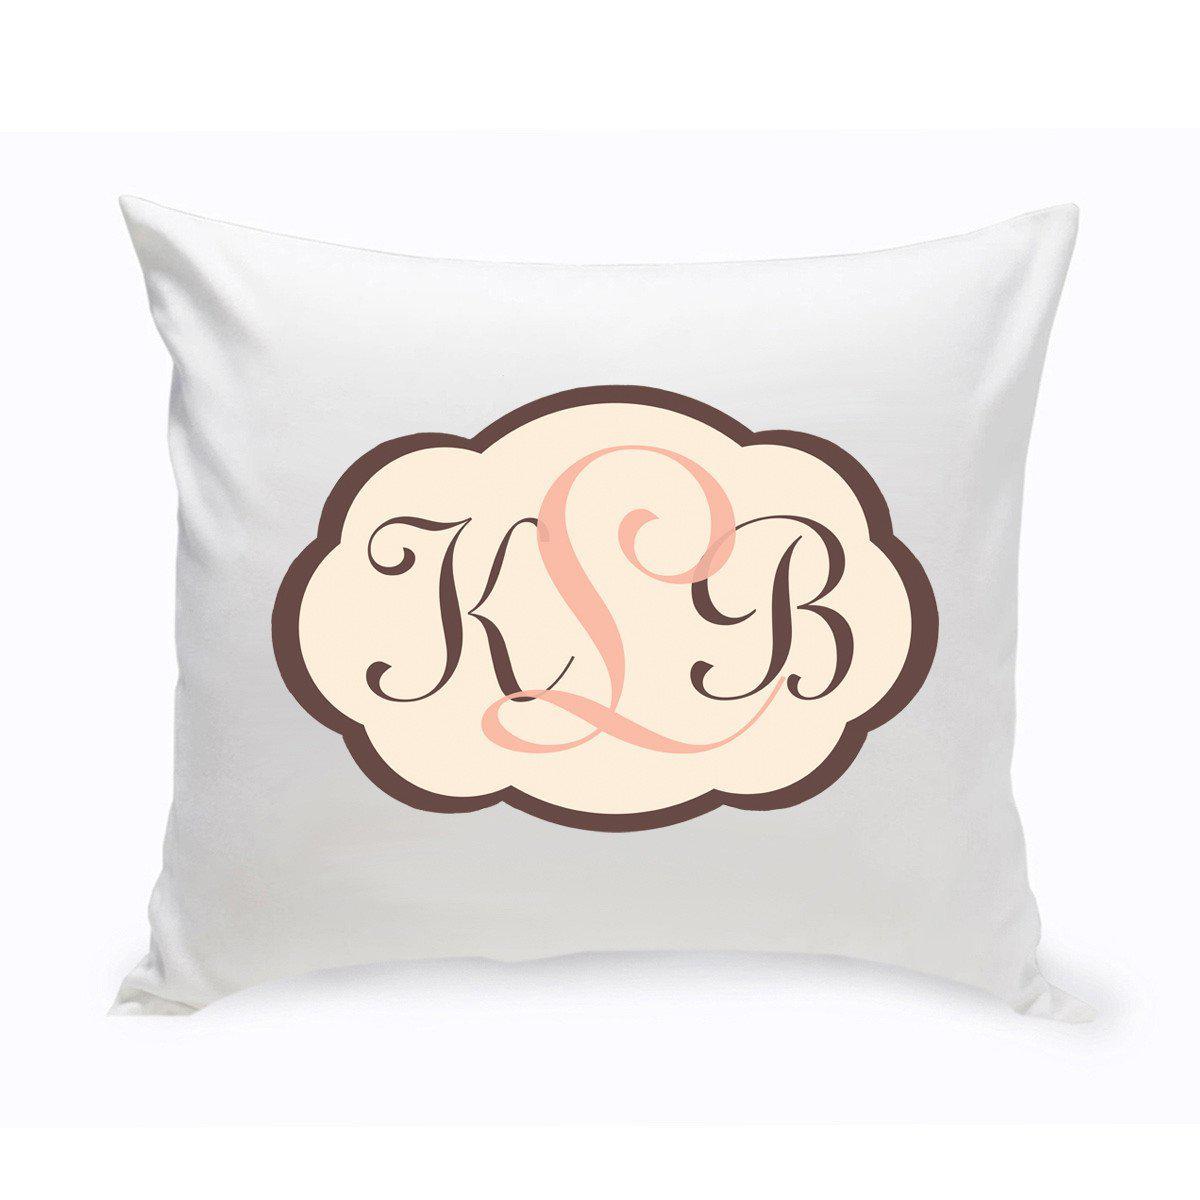 Personalized Monogrammed Baby Pink and Brown Chevron Throw Pillow